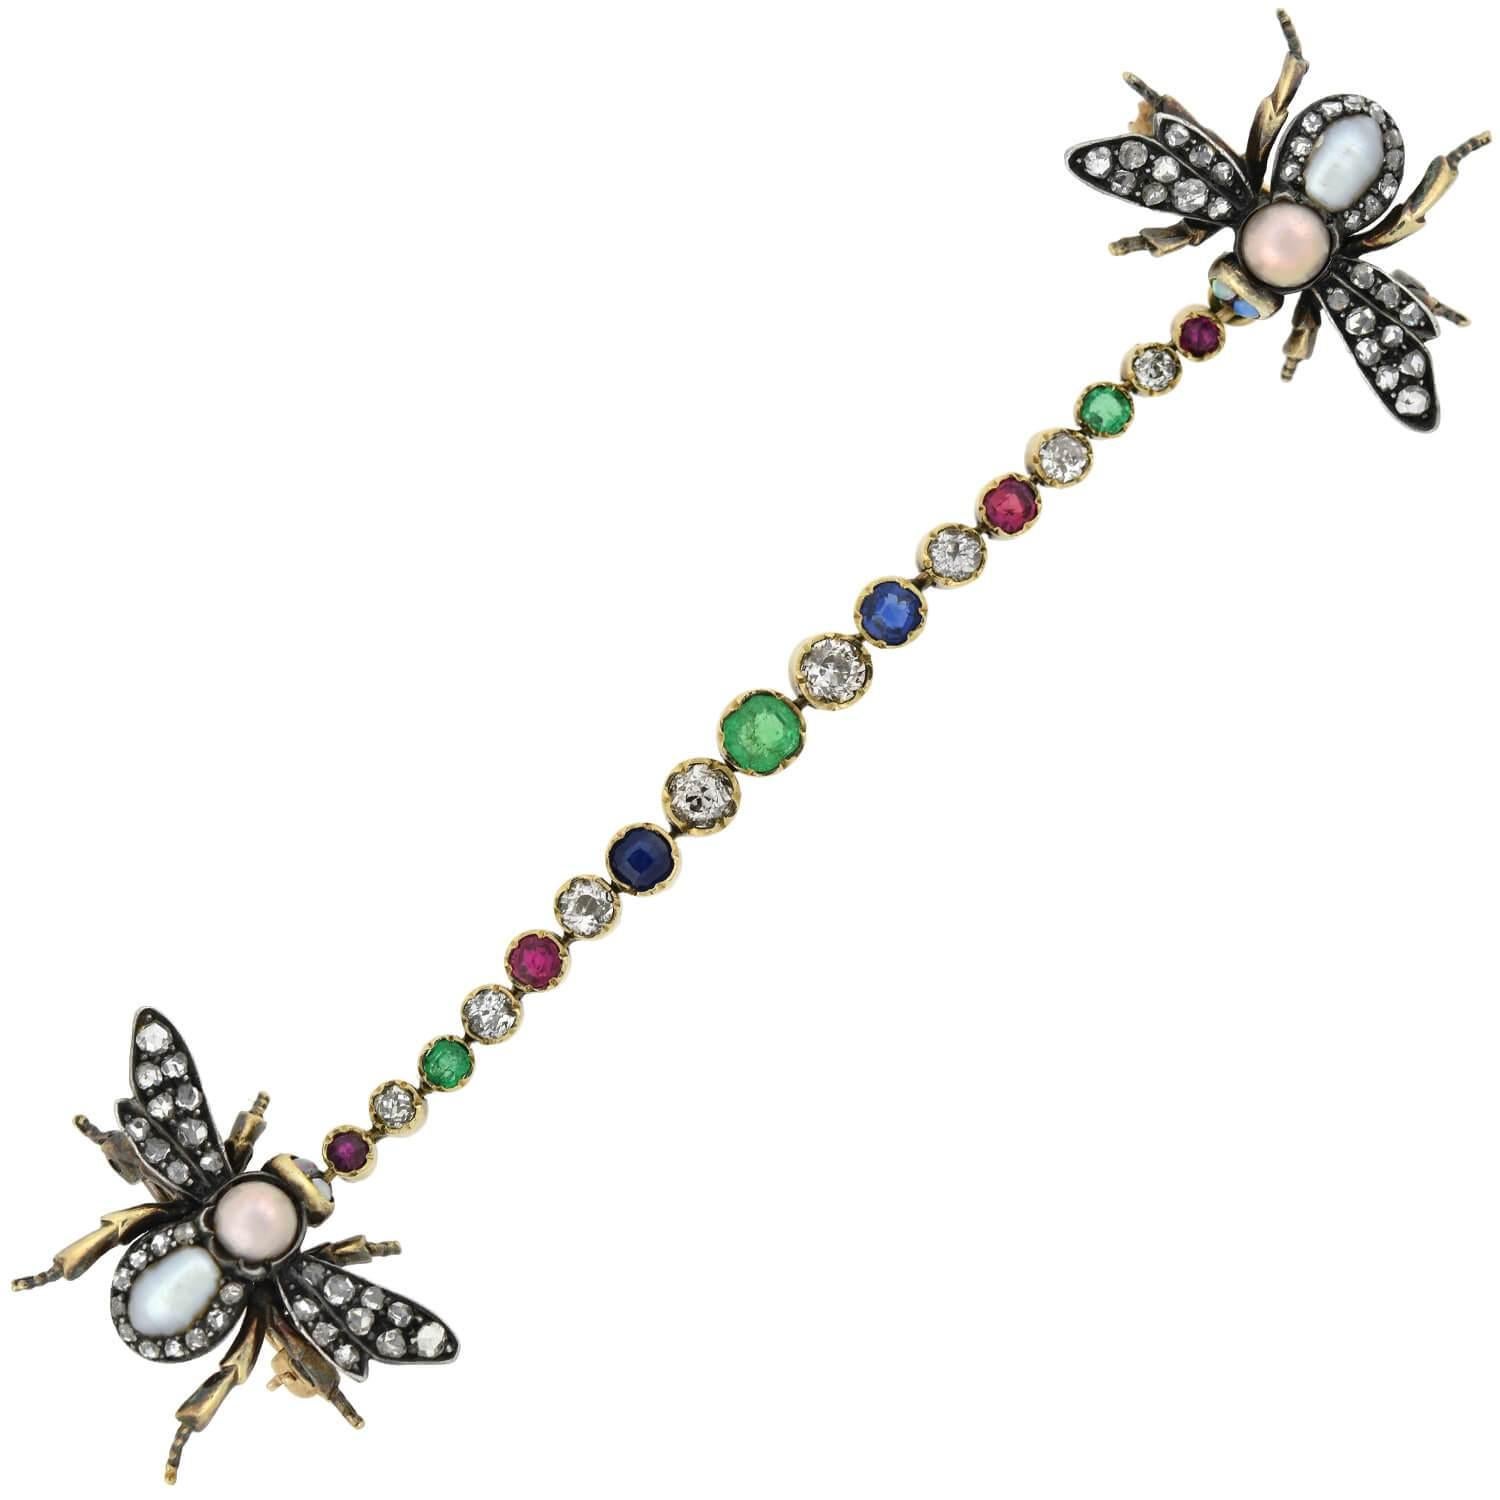 An exceptional and unusual multi-gemstone insect scatter pin from the Victorian (ca1880) era! This stunning piece is comprised of two matching open-winged insect pins linked together by a fantastic gemstone flexible link. All three parts are crafted